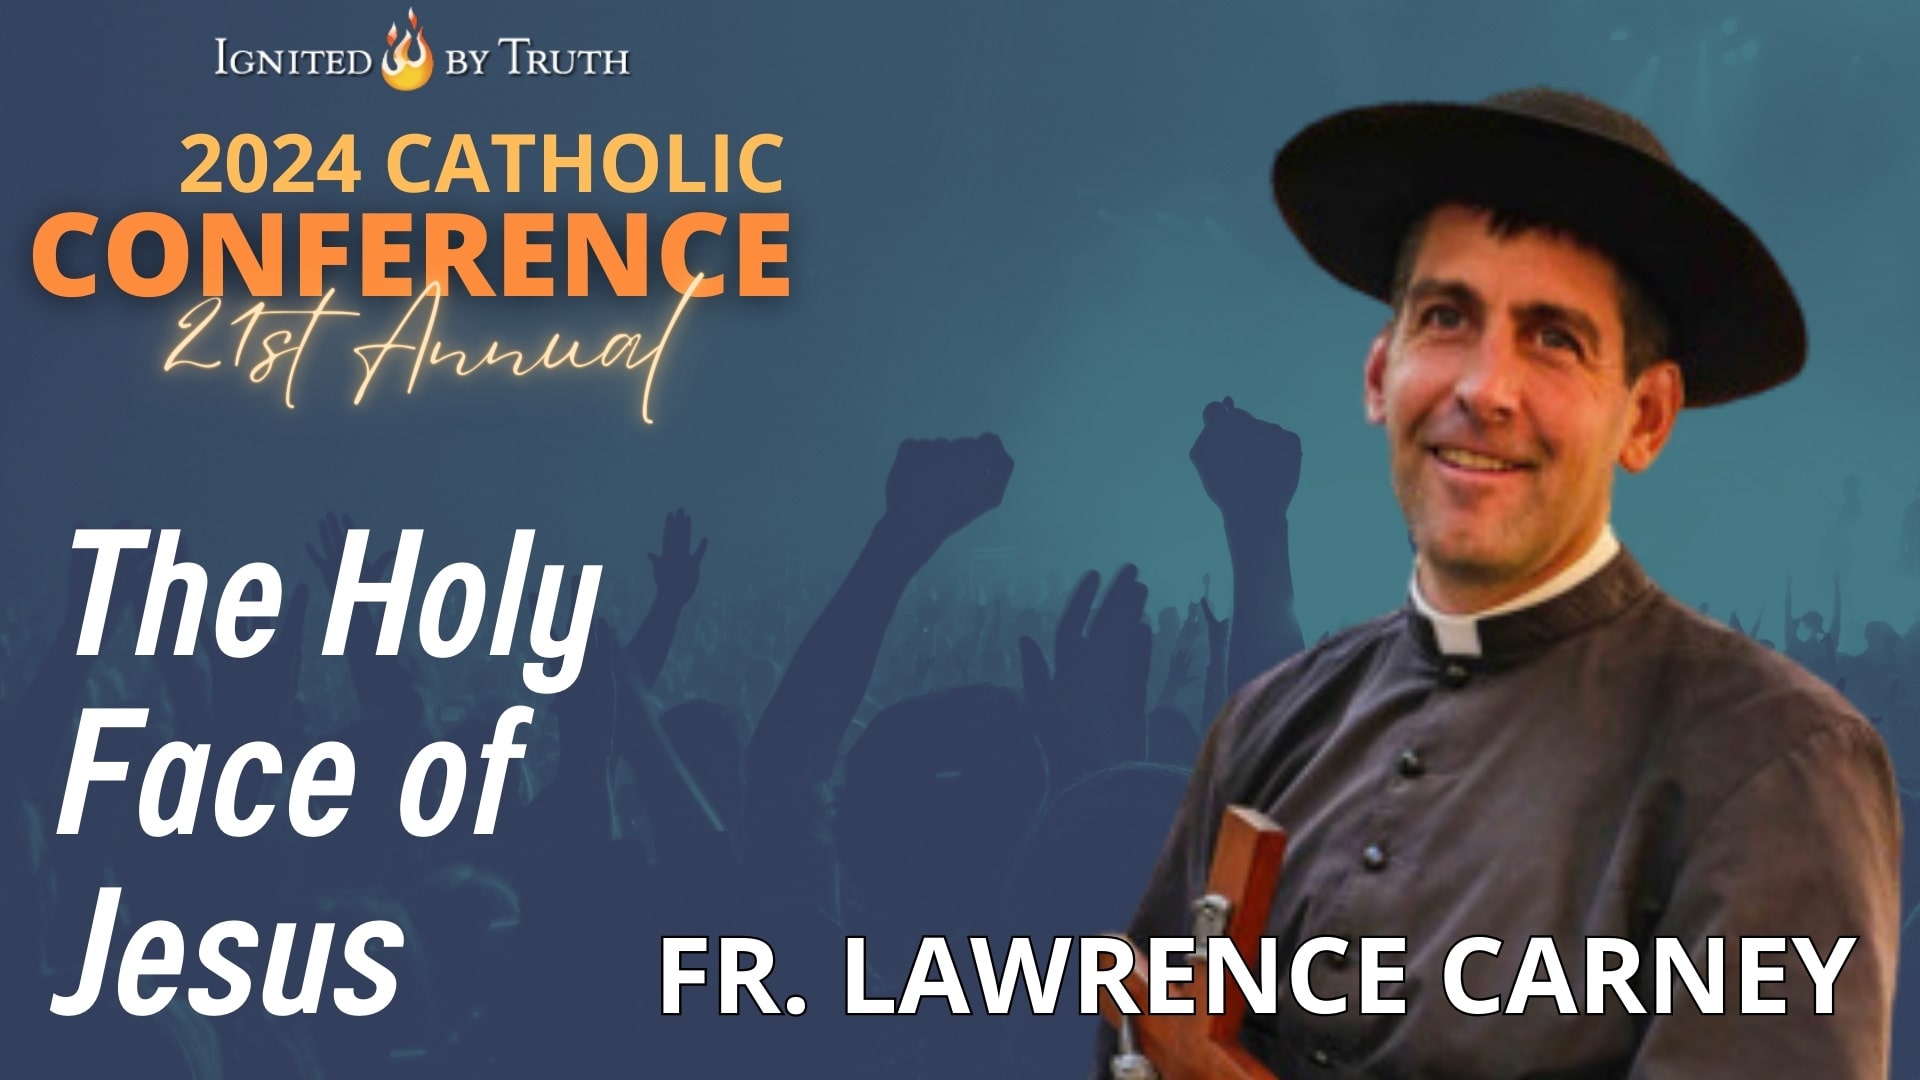 Fr. Lawrence Carney: The Holy Face of Jesus